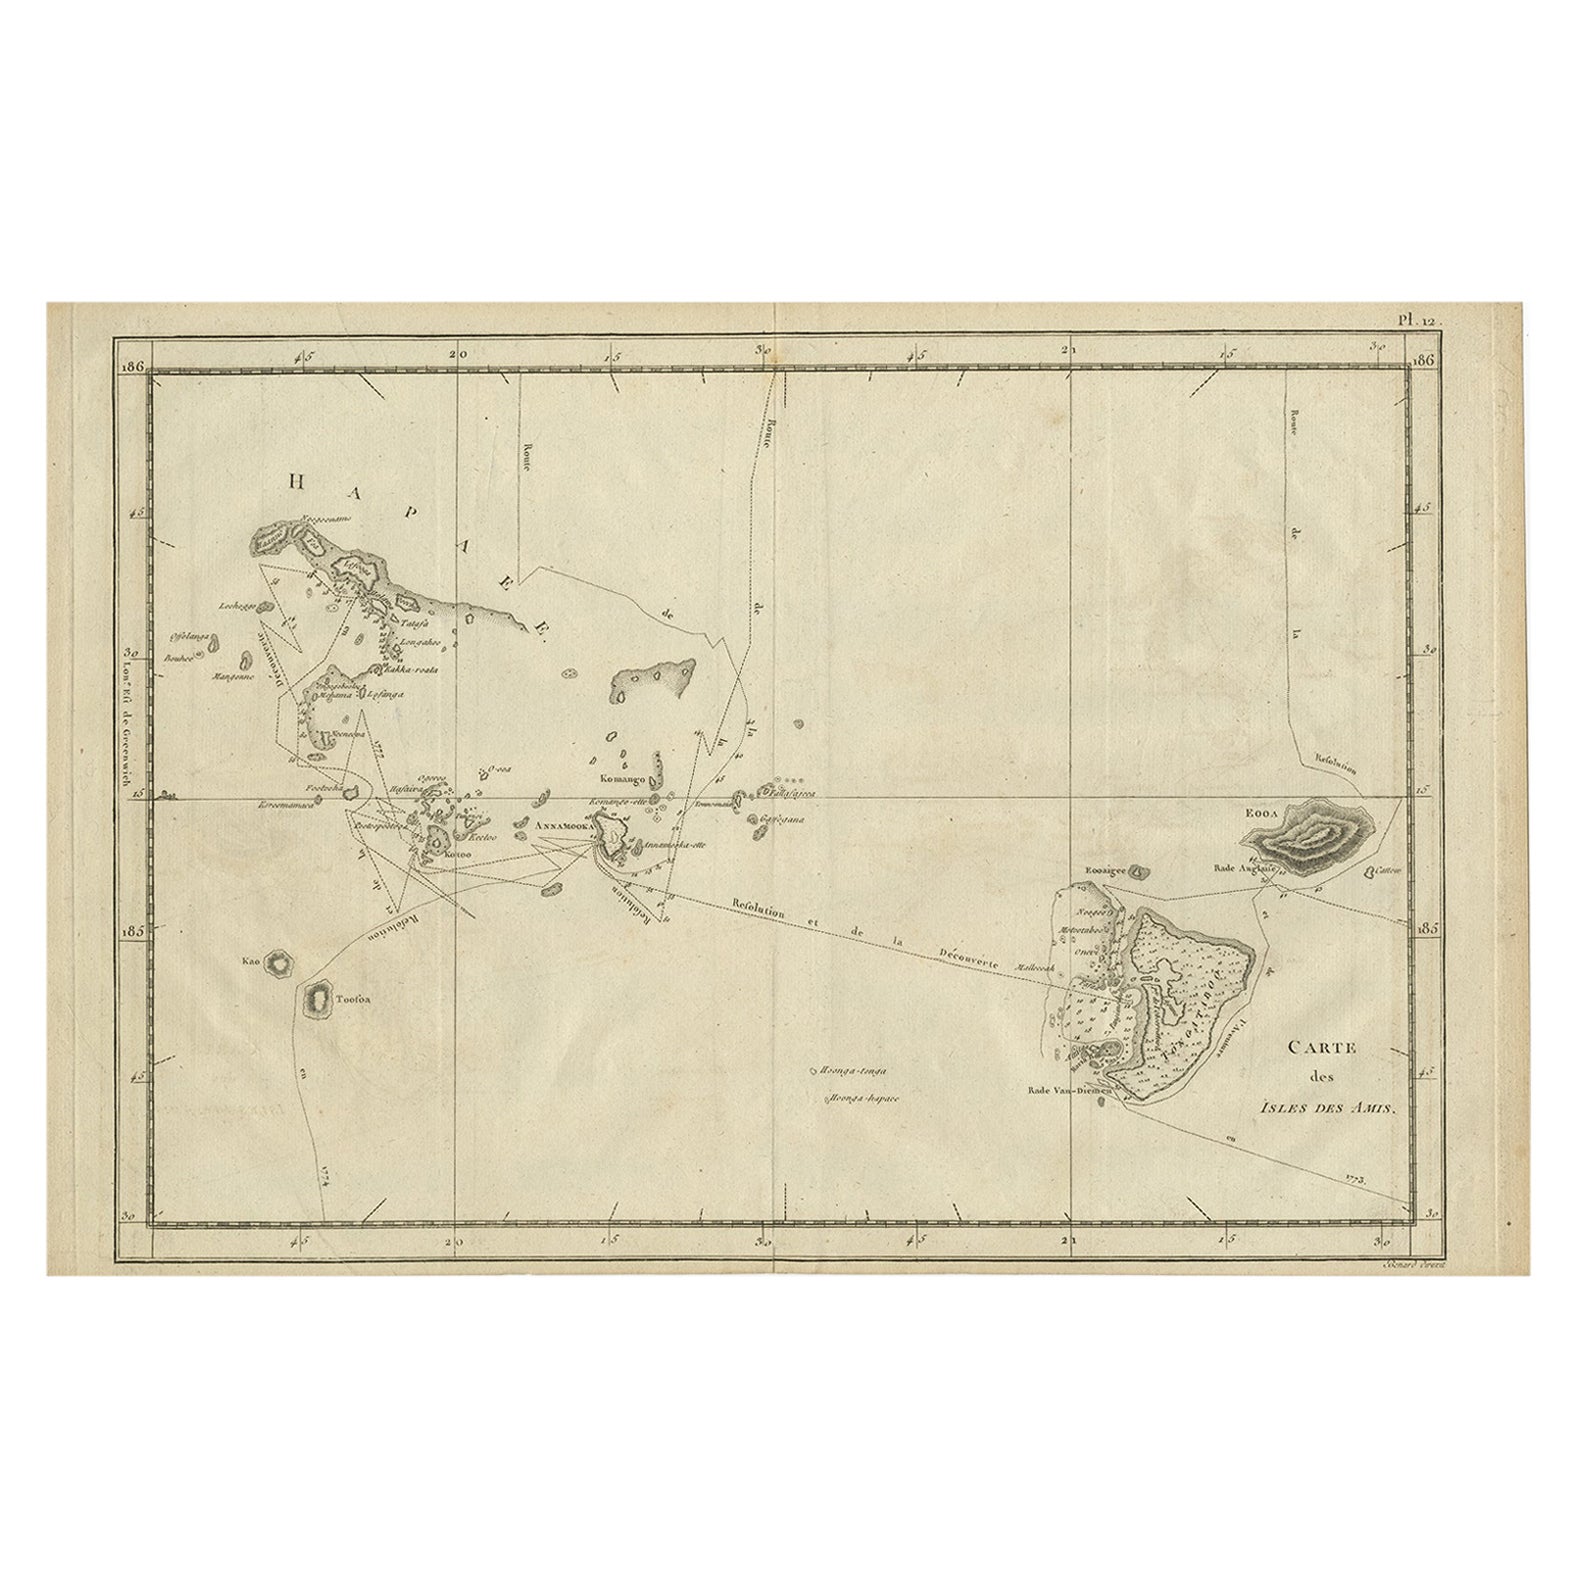 Antique Engraved Map of the Friendly Islands or Tonga, ca.1785